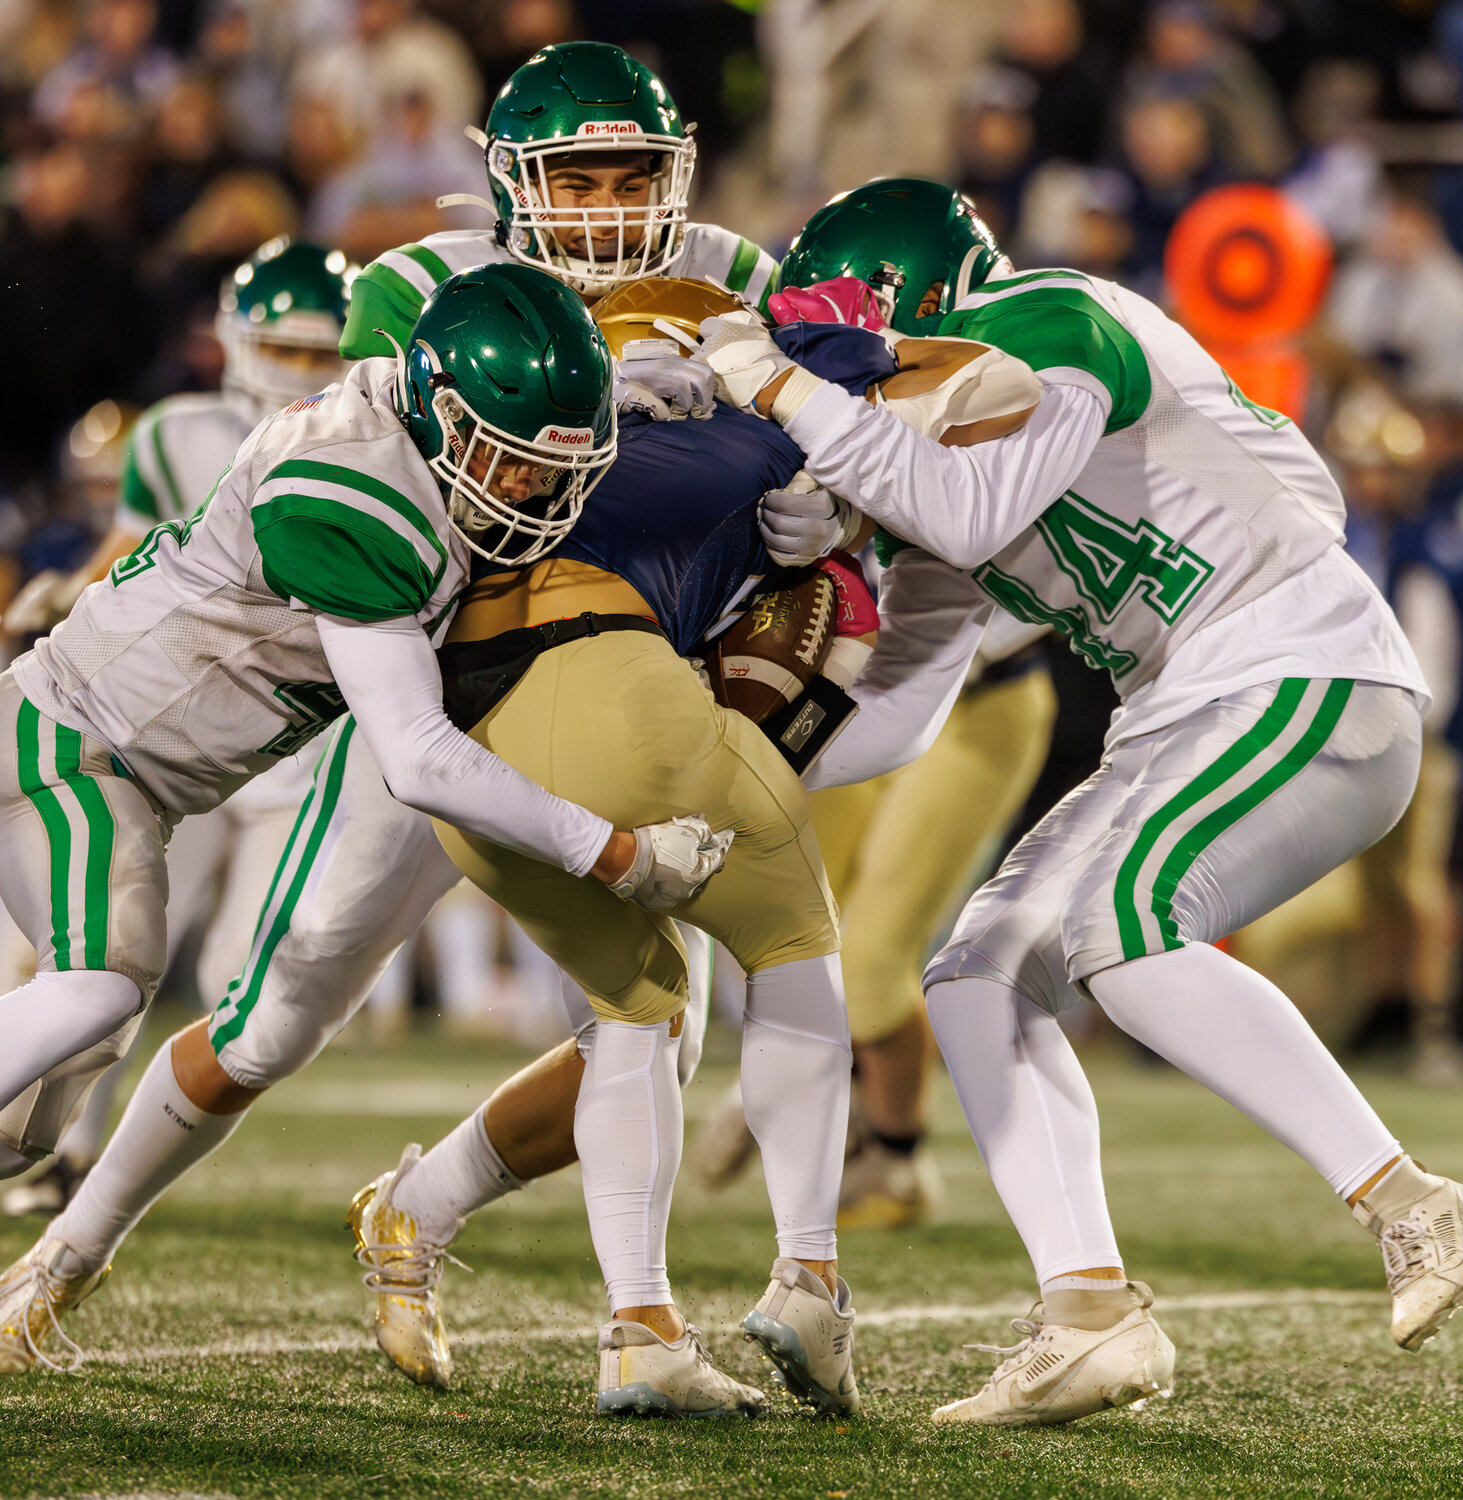 Seaford’s defense was stout all season but had a tough time stopping Bayport in last Saturday’s Long Island Class IV title game.